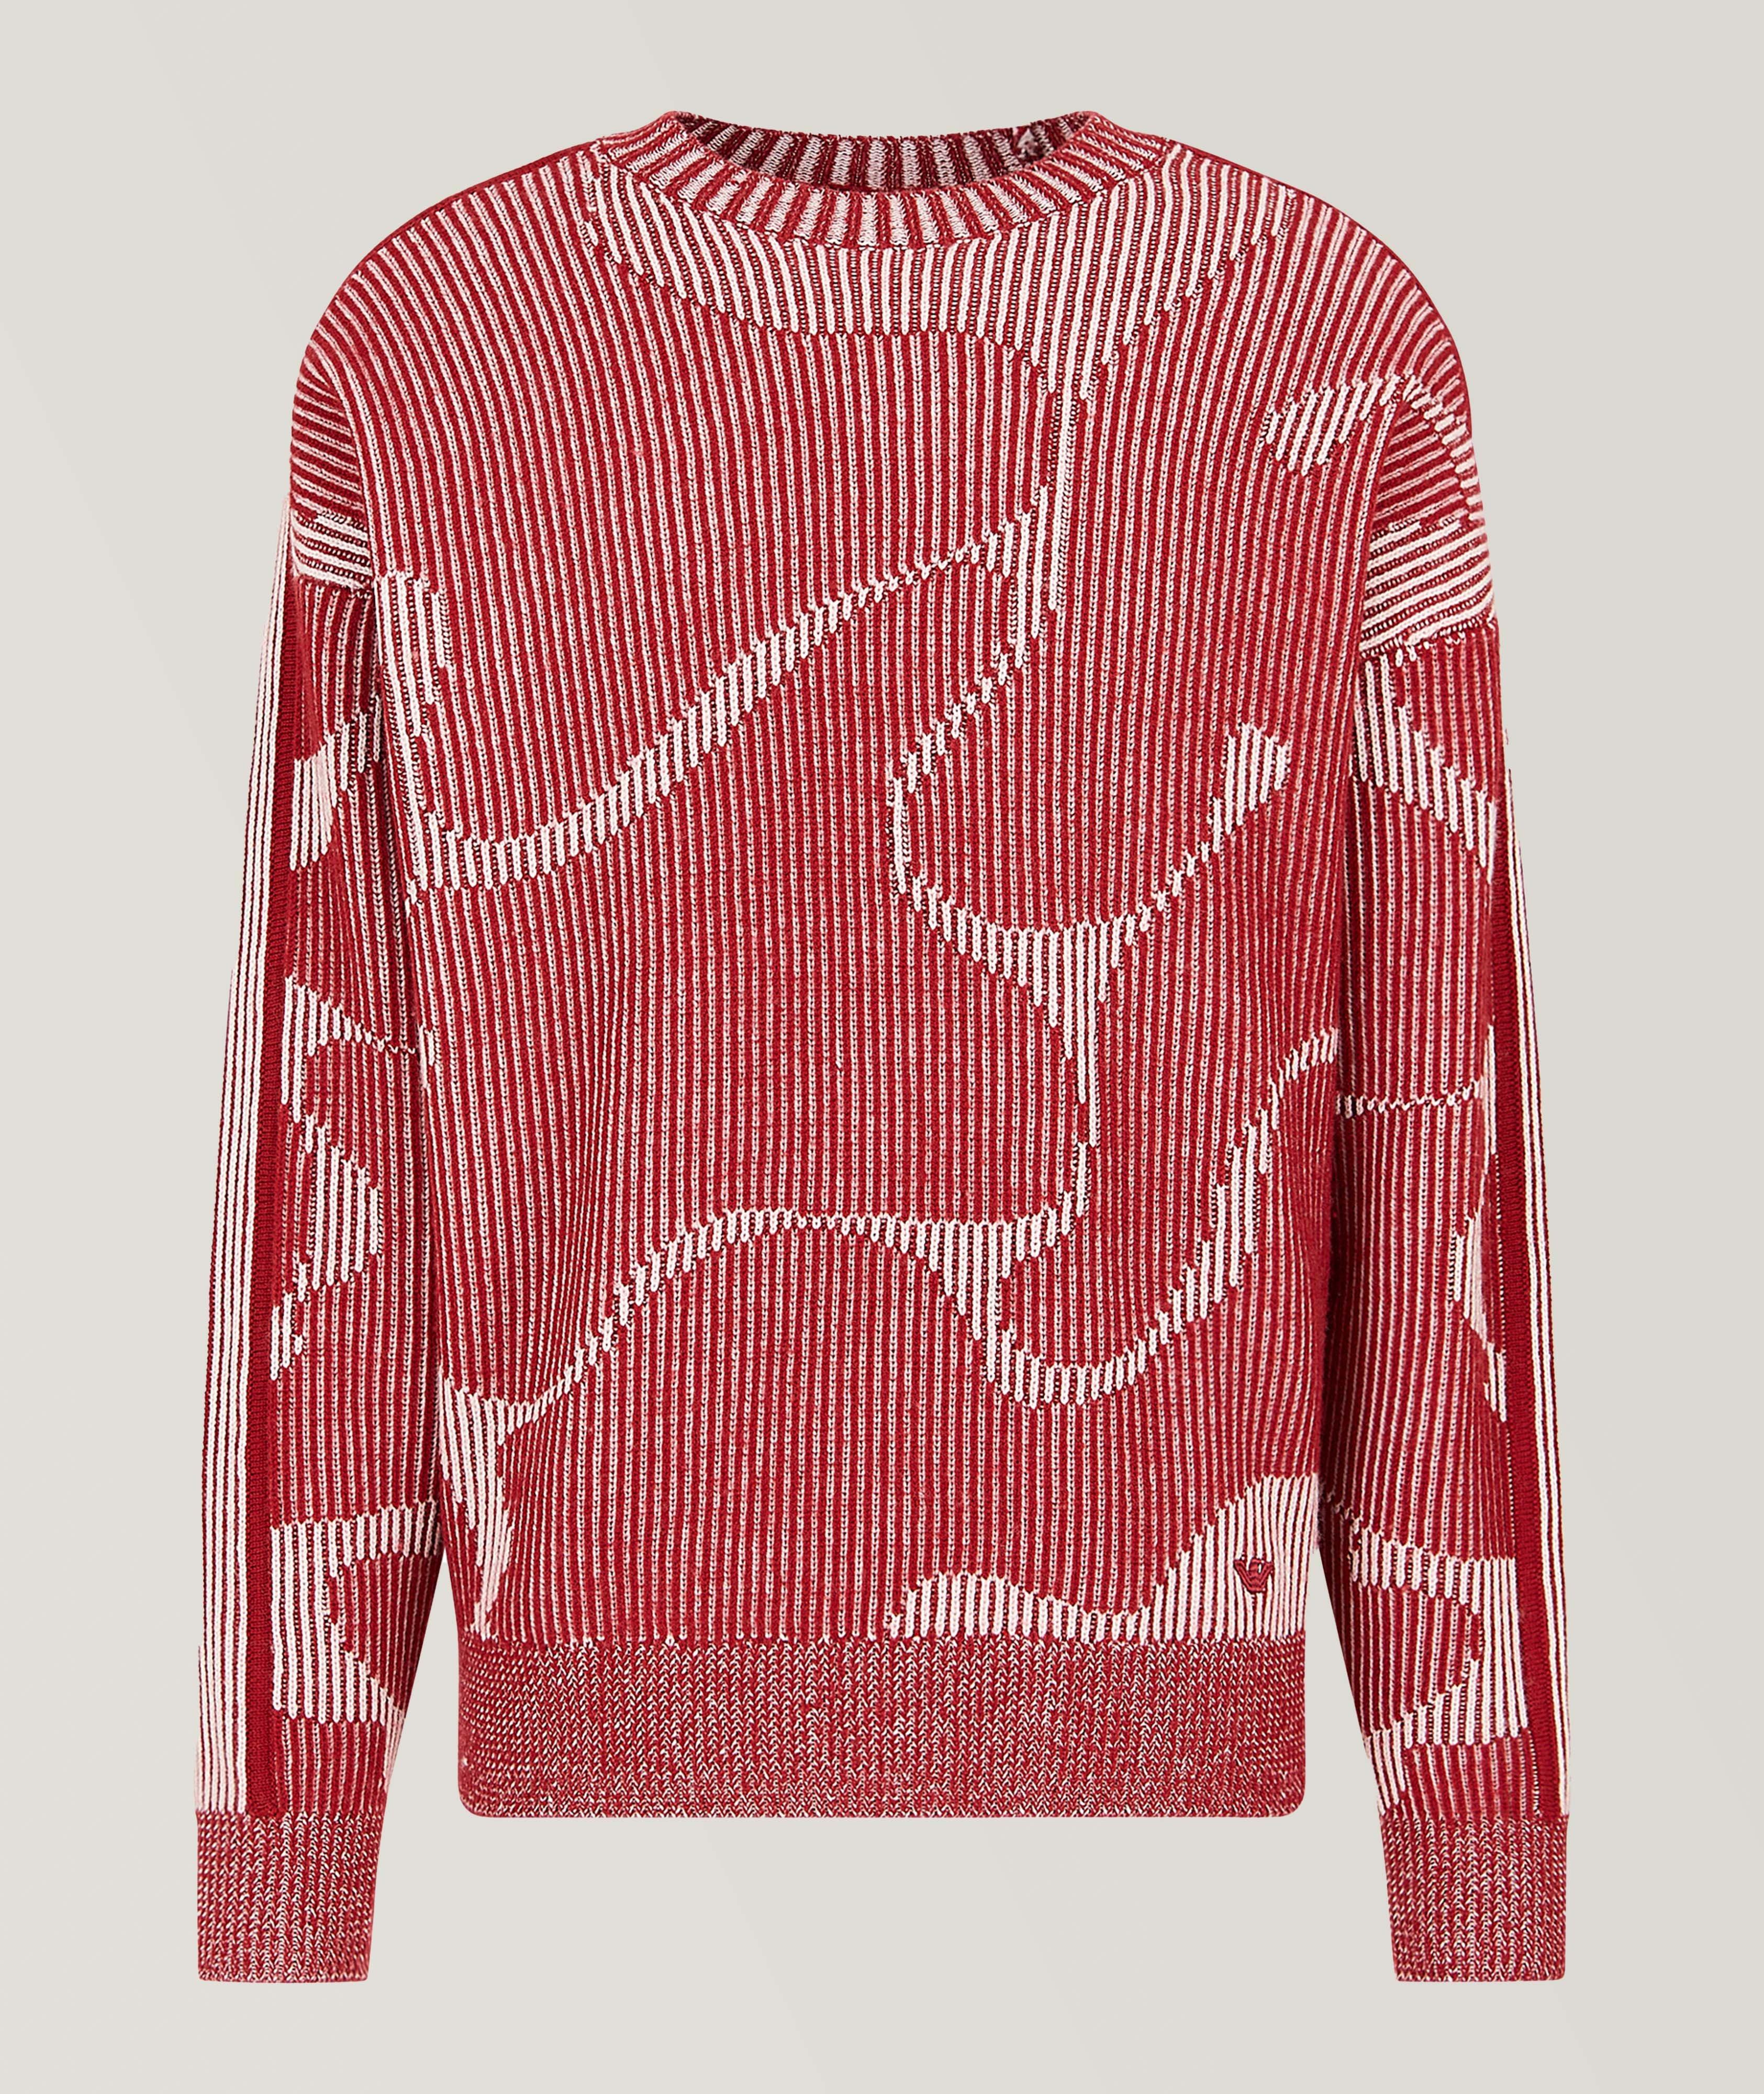 Abstract Jaquared Pattern Ribbed Knit Sweater  image 0